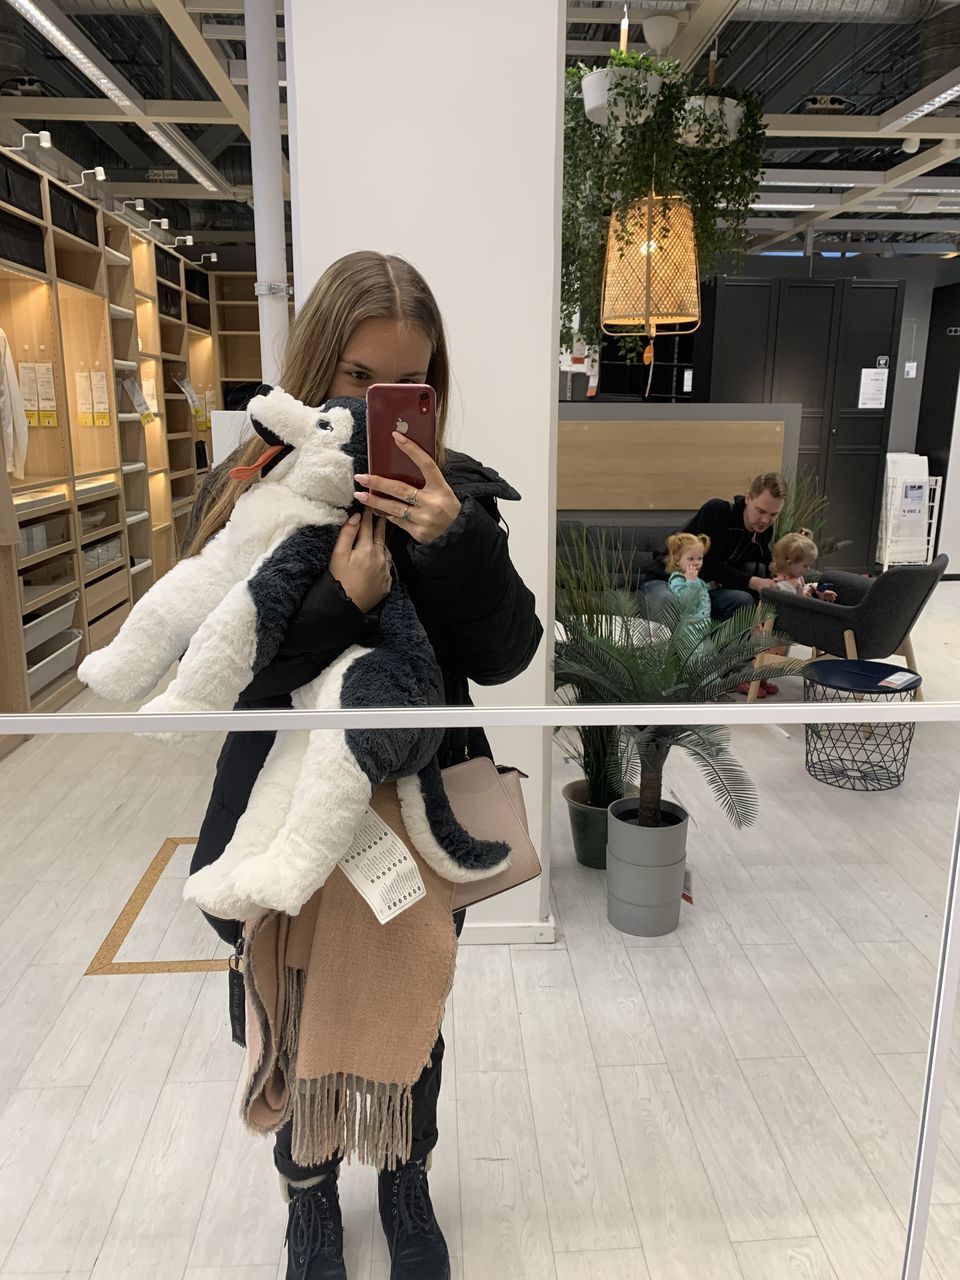 WOMAN PHOTOGRAPHING WITH SMART PHONE IN MIRROR